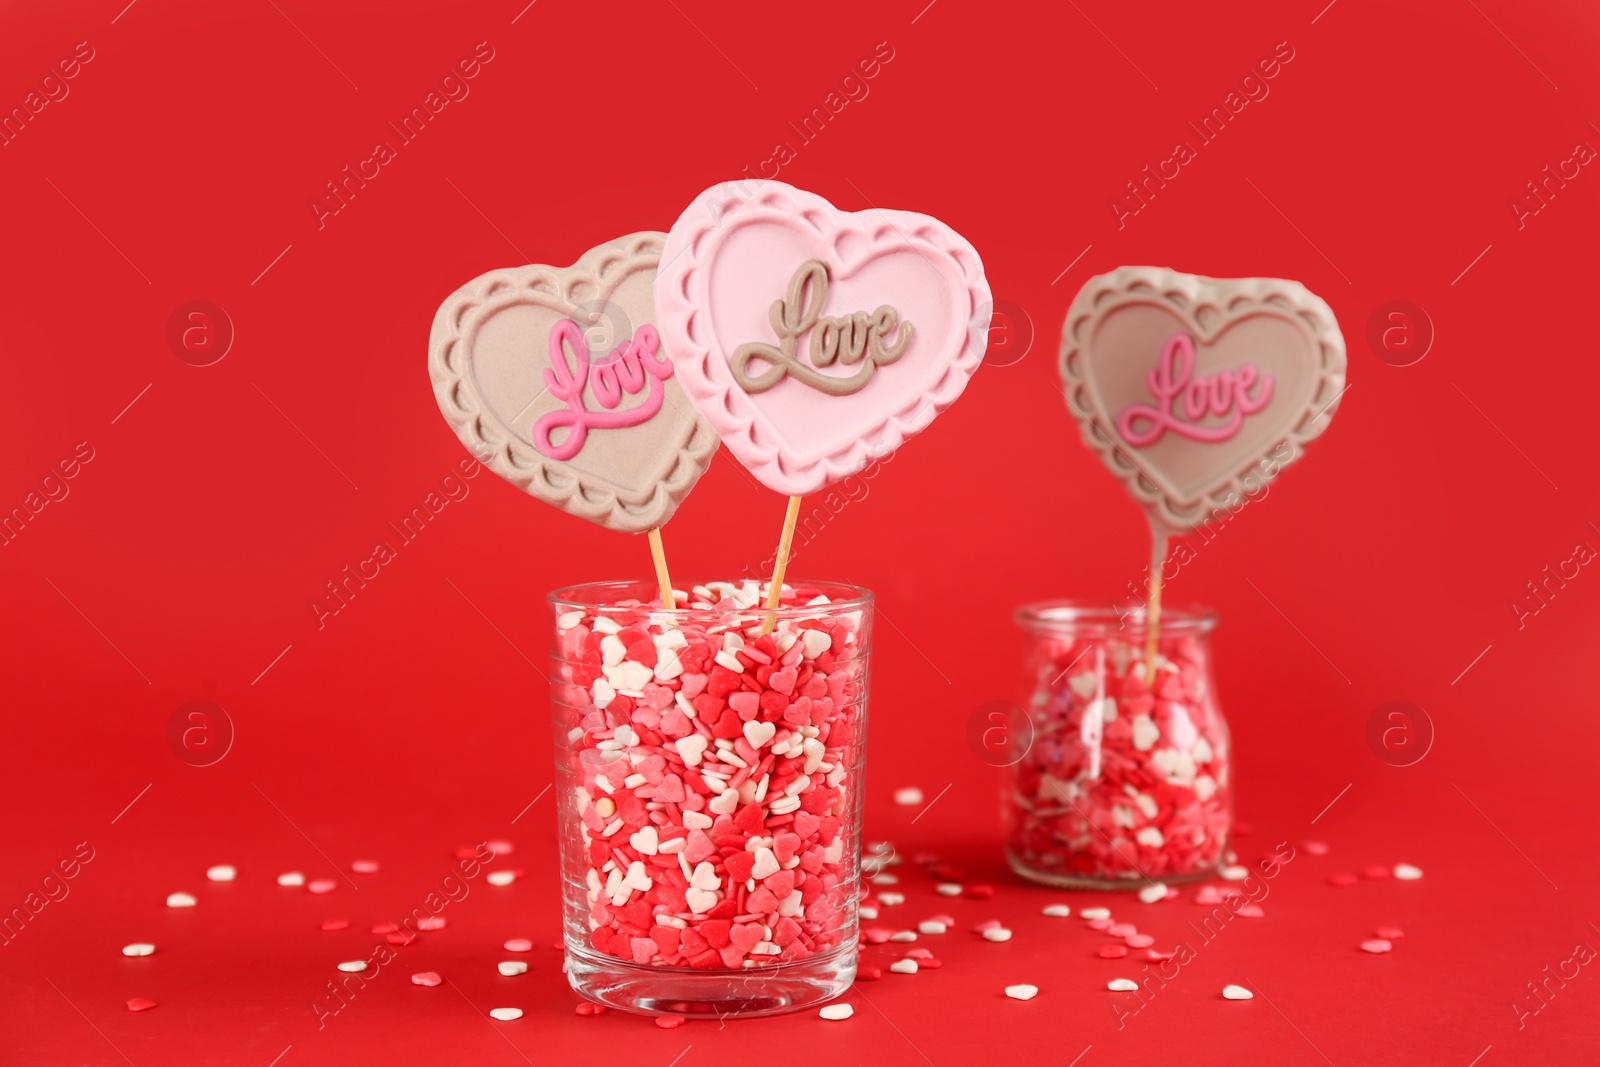 Photo of Heart shaped lollipops made of chocolate with sprinkles in glasses on red background